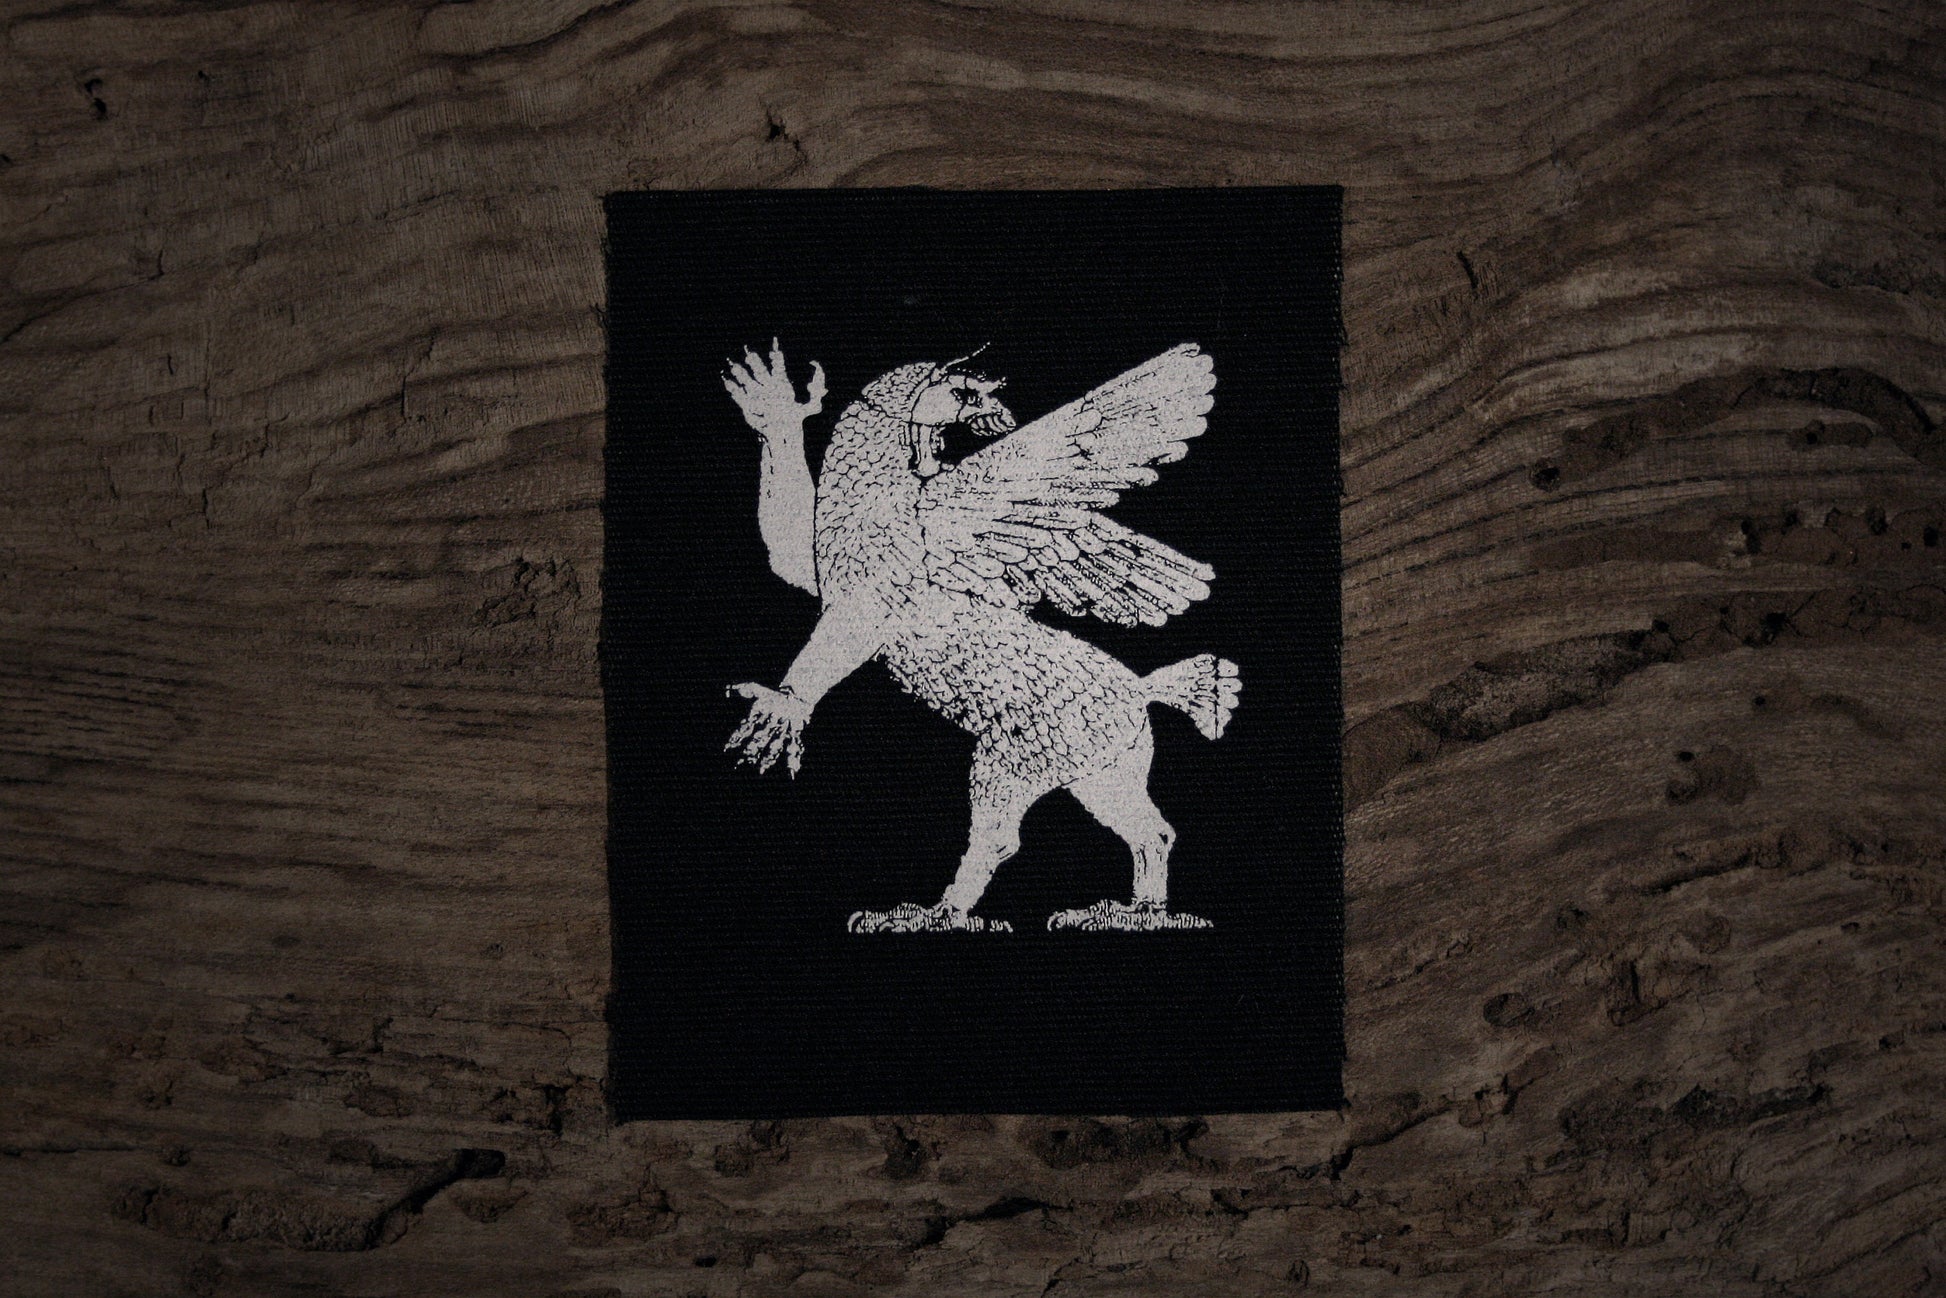 Marduk, God - screen printed PATCH